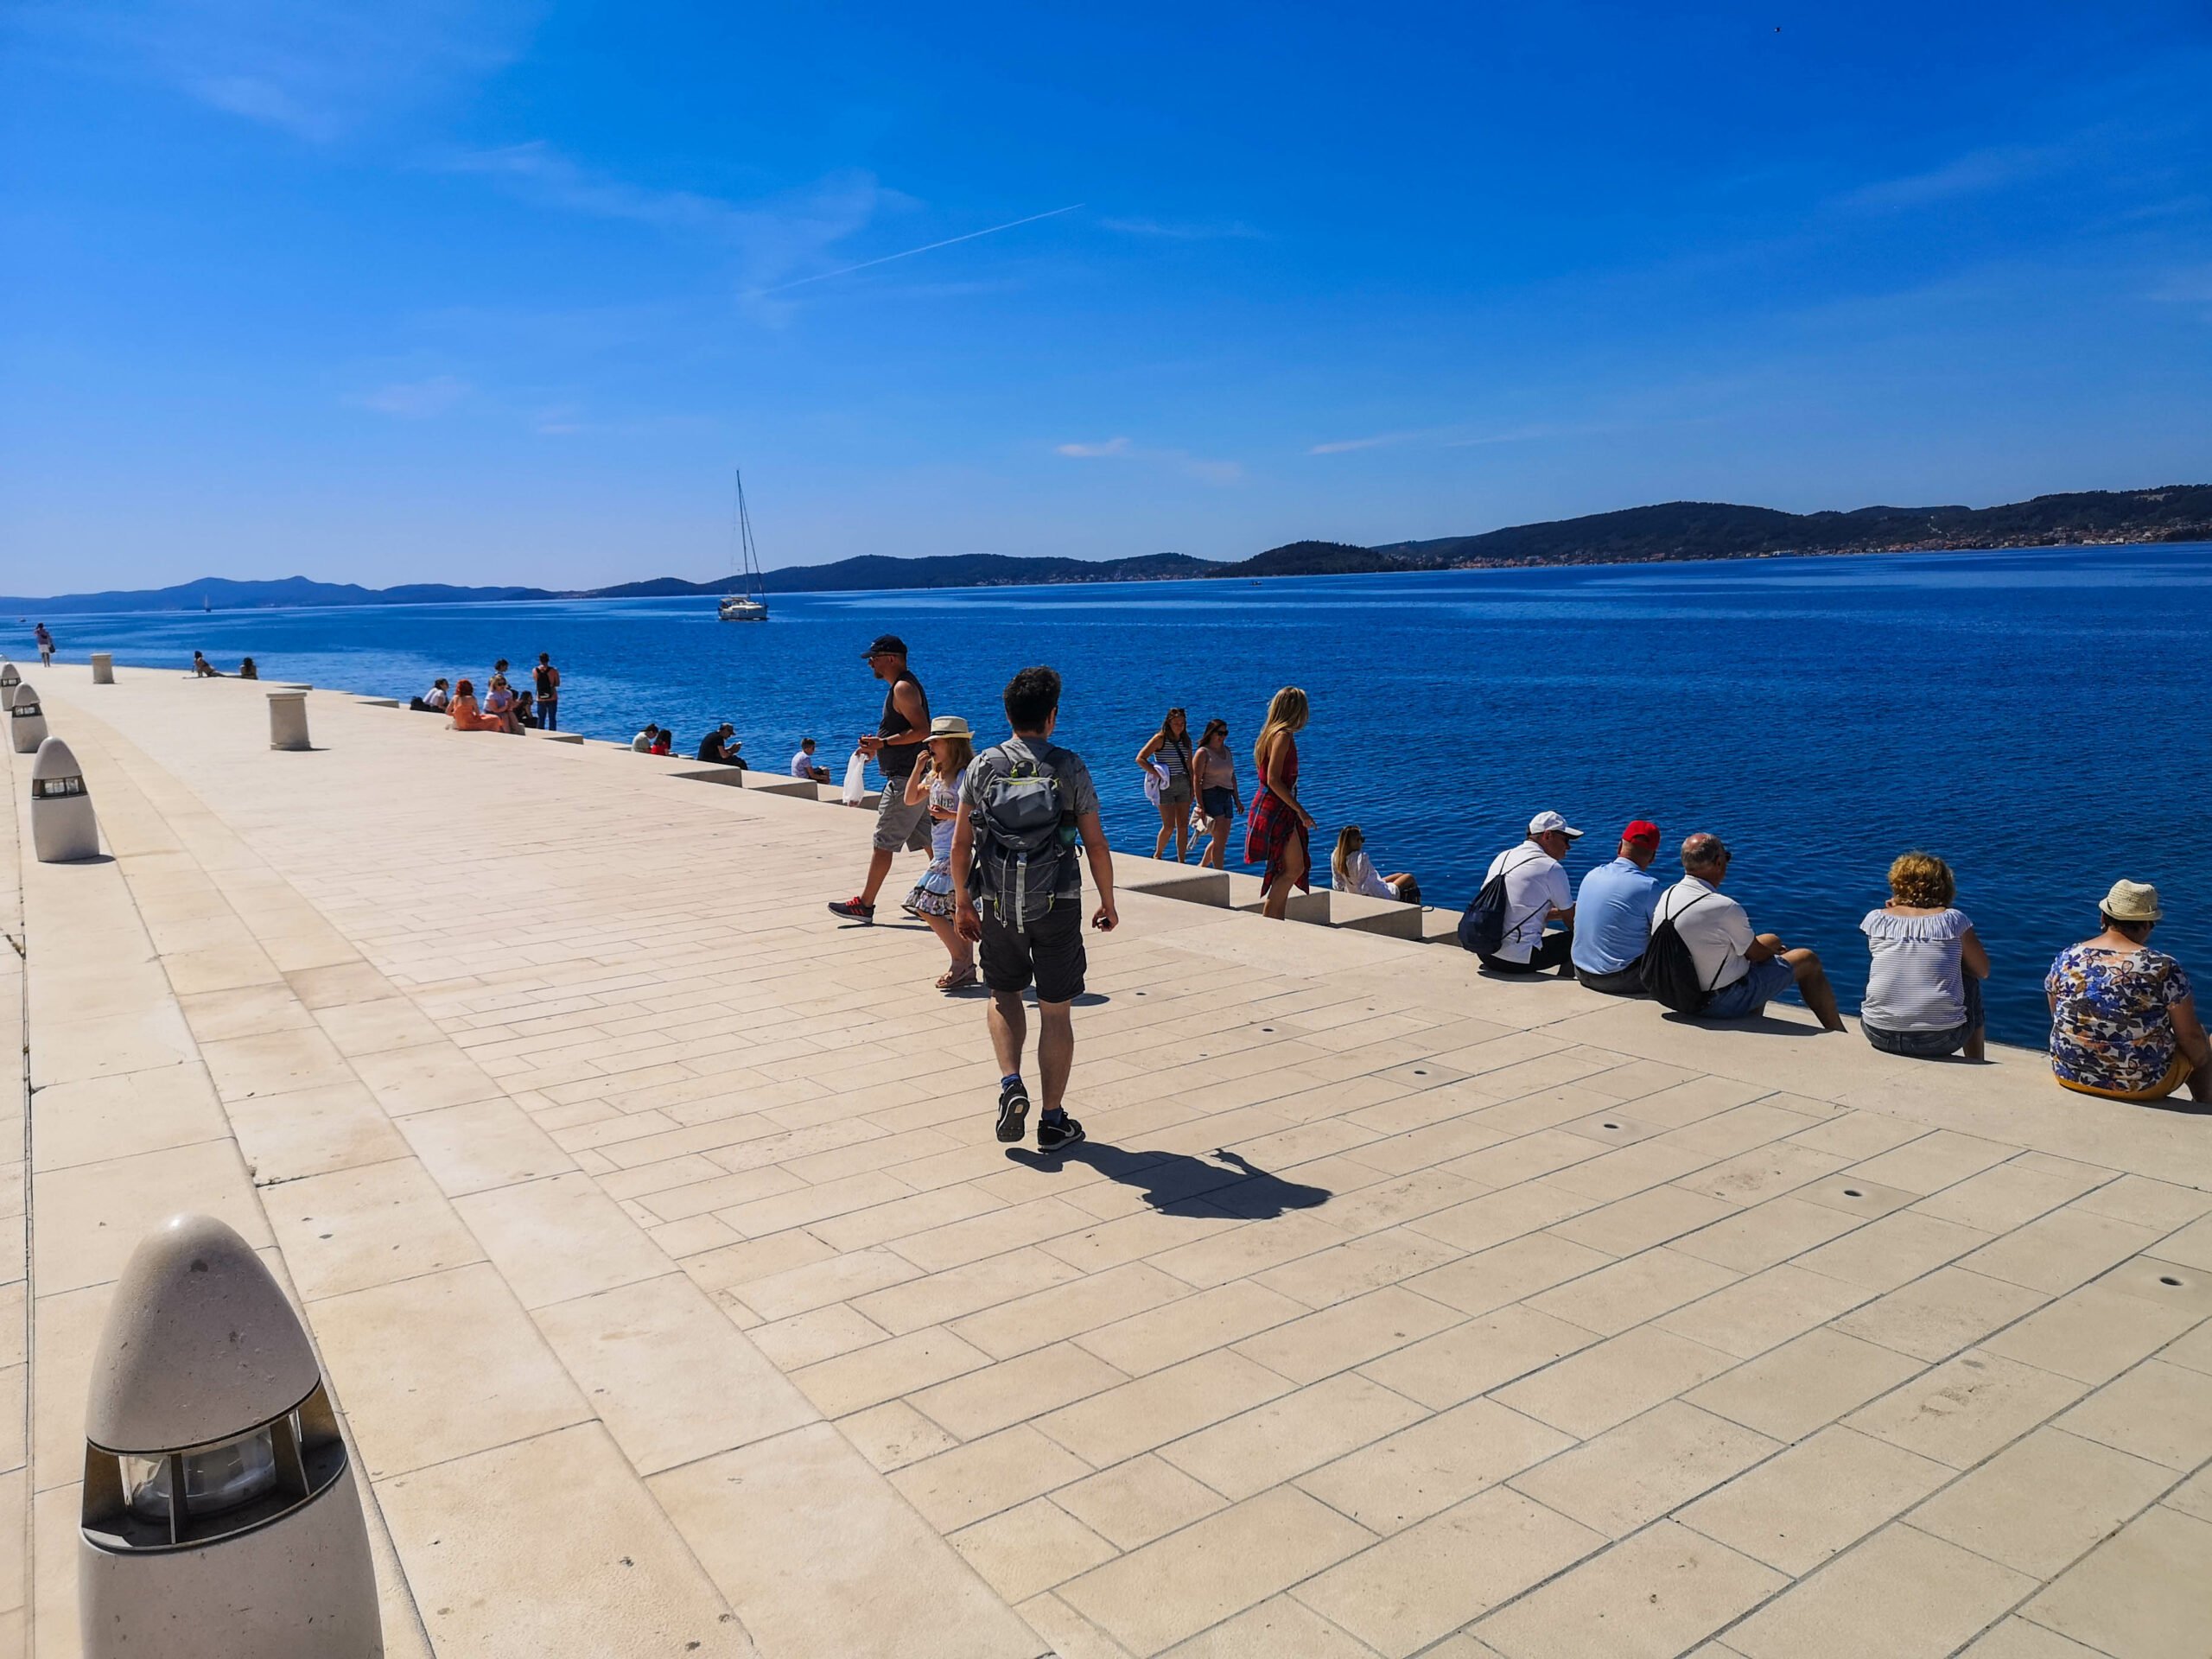 A group of people standing on a pier near the water next to the Zadar Sea Organ